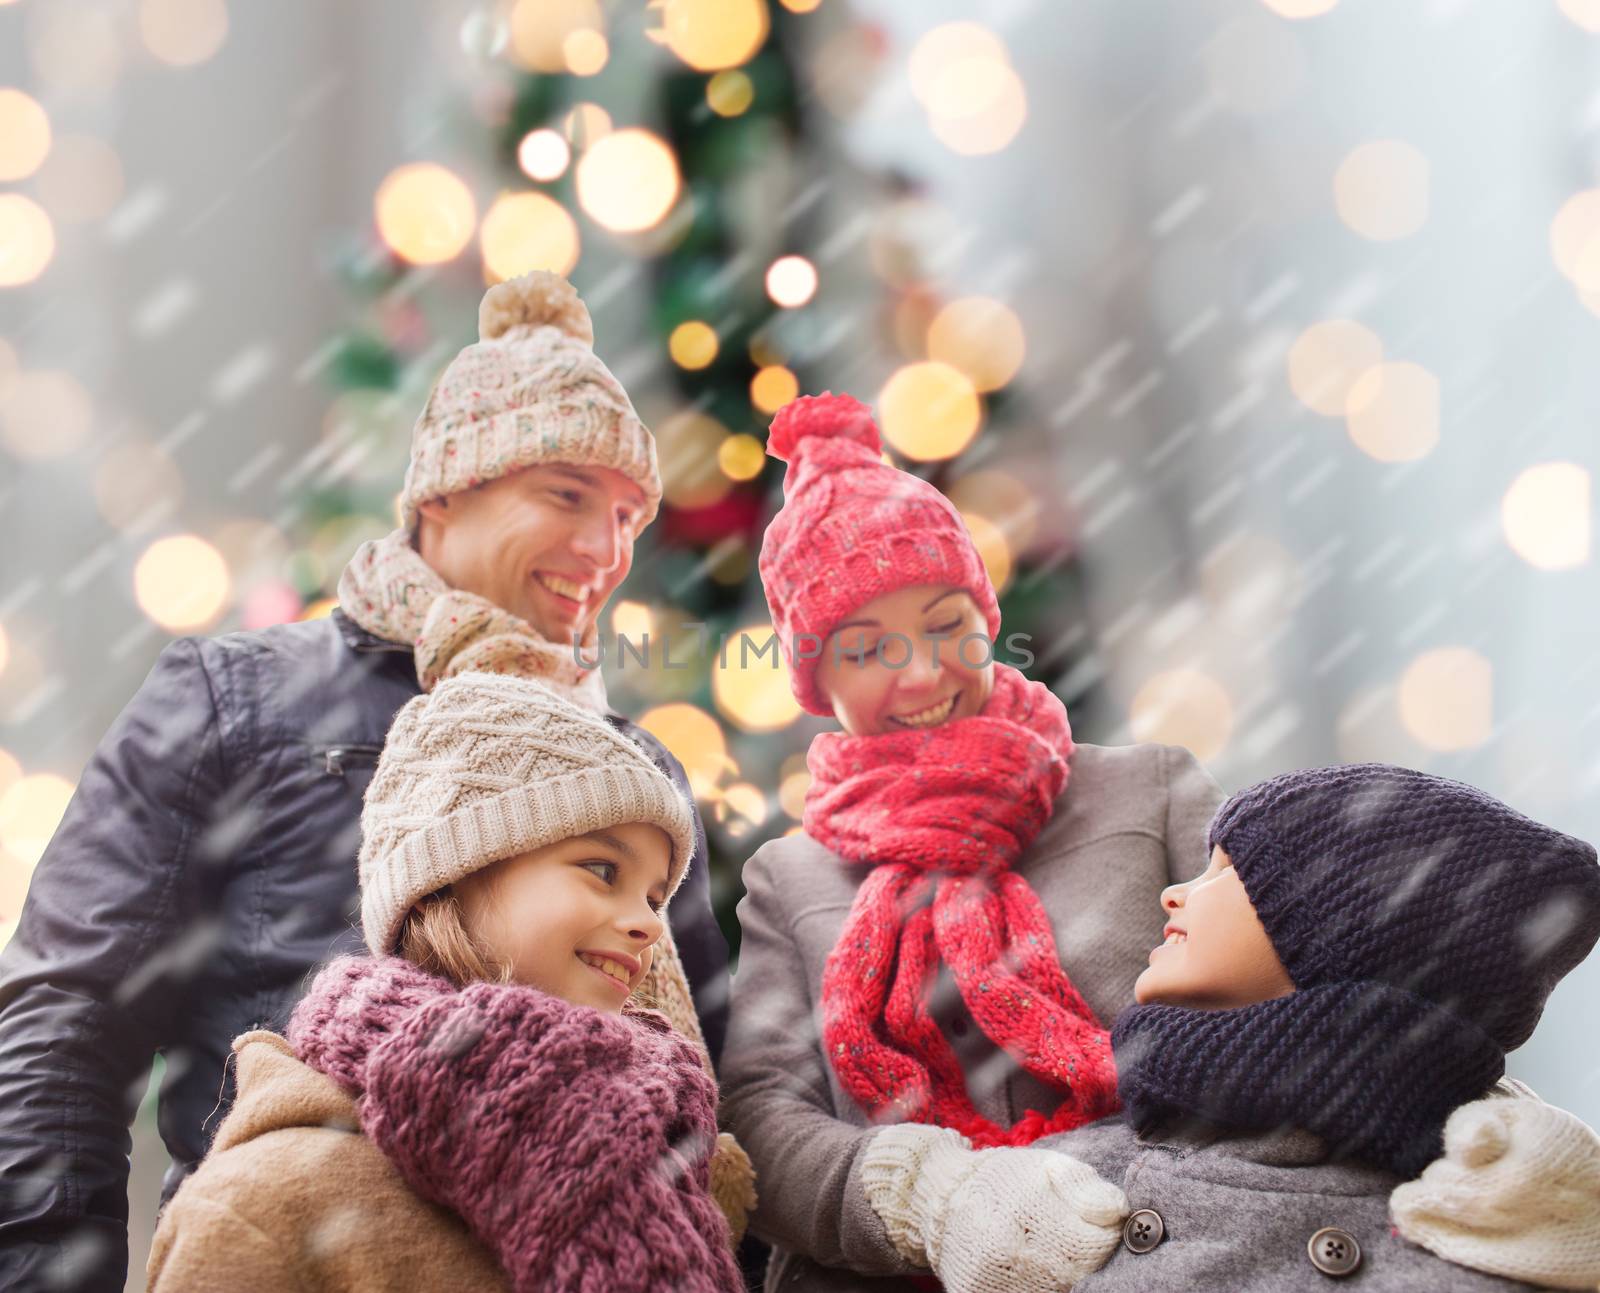 family, childhood, season, holidays and people concept - happy family in winter clothes over christmas tree lights background